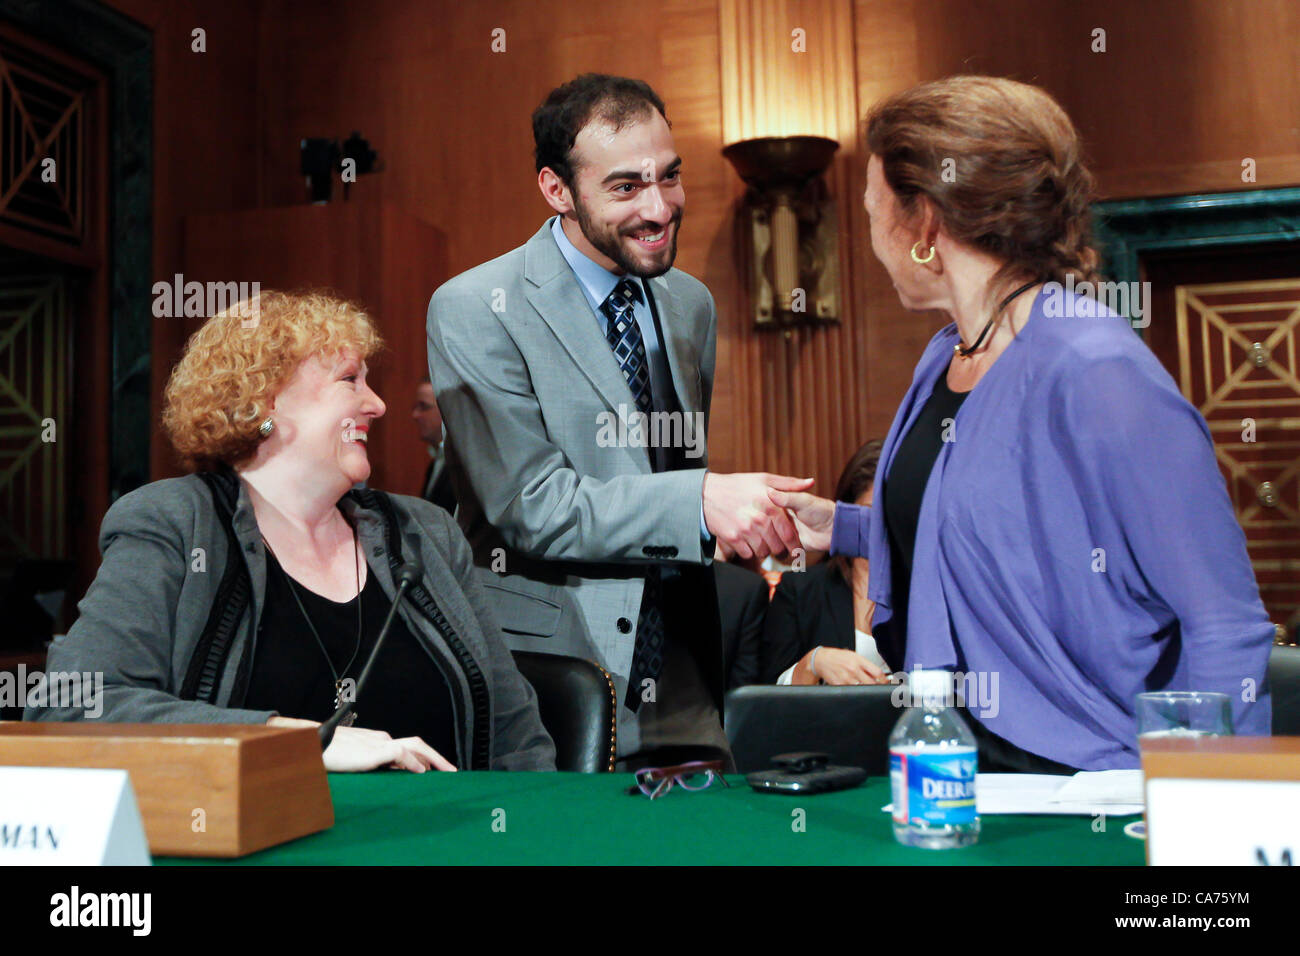 June 20, 2012 - Washington, DC, U.S. - Associate Professor of Finance at DePaul University ANN SHERMAN (left) chats with ILAN MOSCOVITZ of The Motley Fool, and founder and principal of Class V Group, LLC LISE BUYER prior to their testimony in front of the Senate Securities, Insurance and Investment Subcommittee hearing on ''Examining the IPO Process: Is It Working for Ordinary Investors? (Credit Image: © James Berglie/ZUMAPRESS.com) Stock Photo